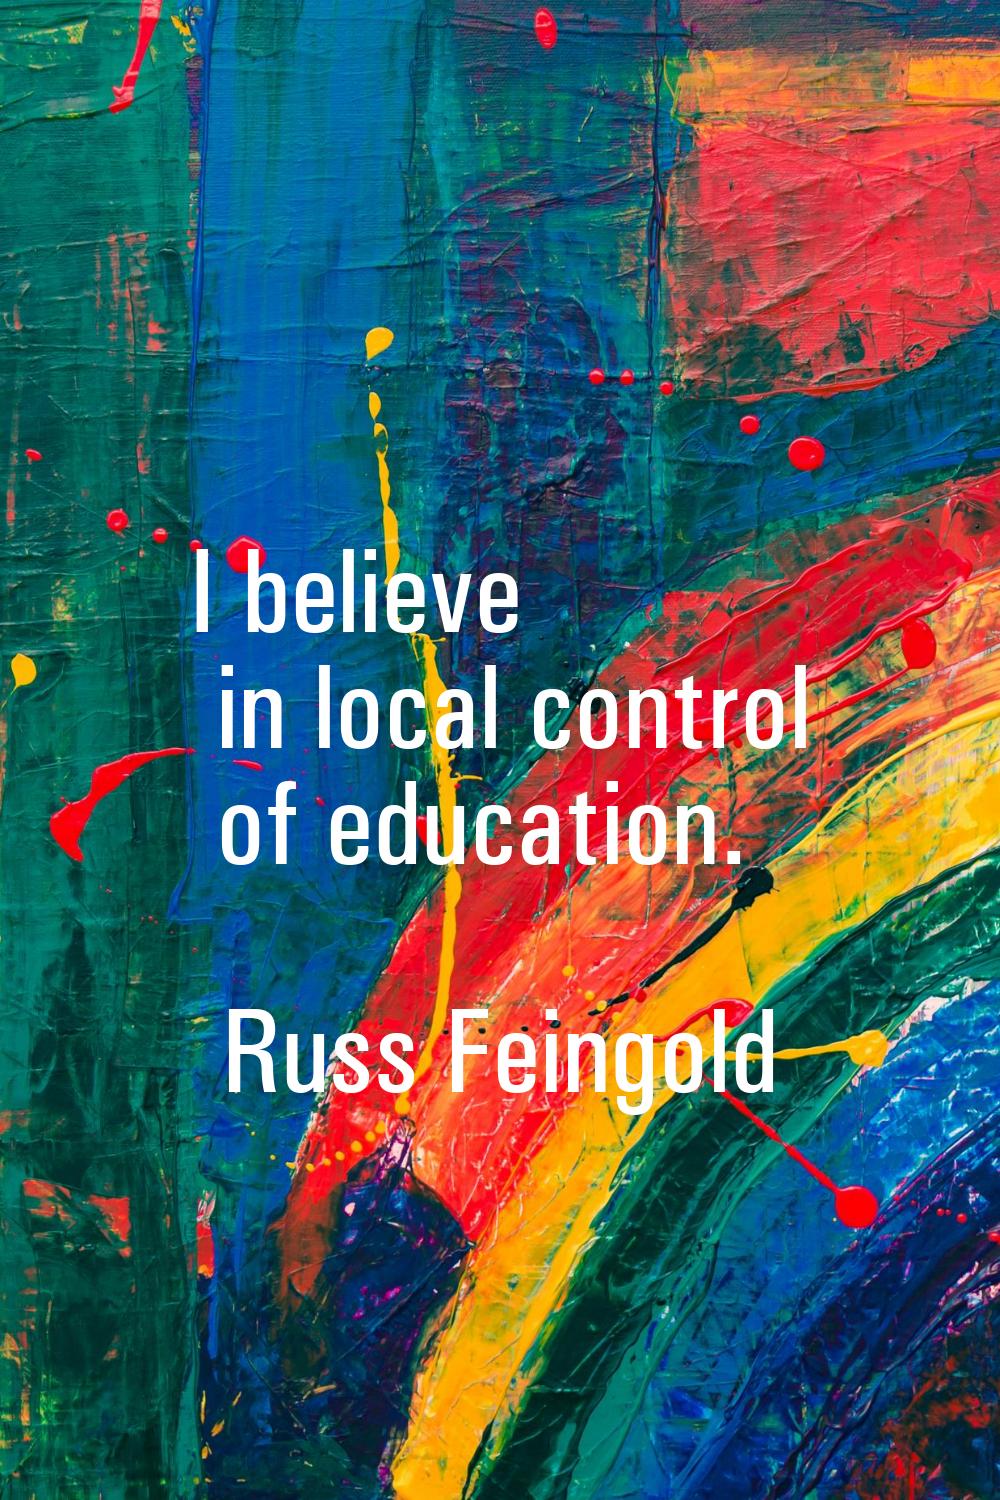 I believe in local control of education.